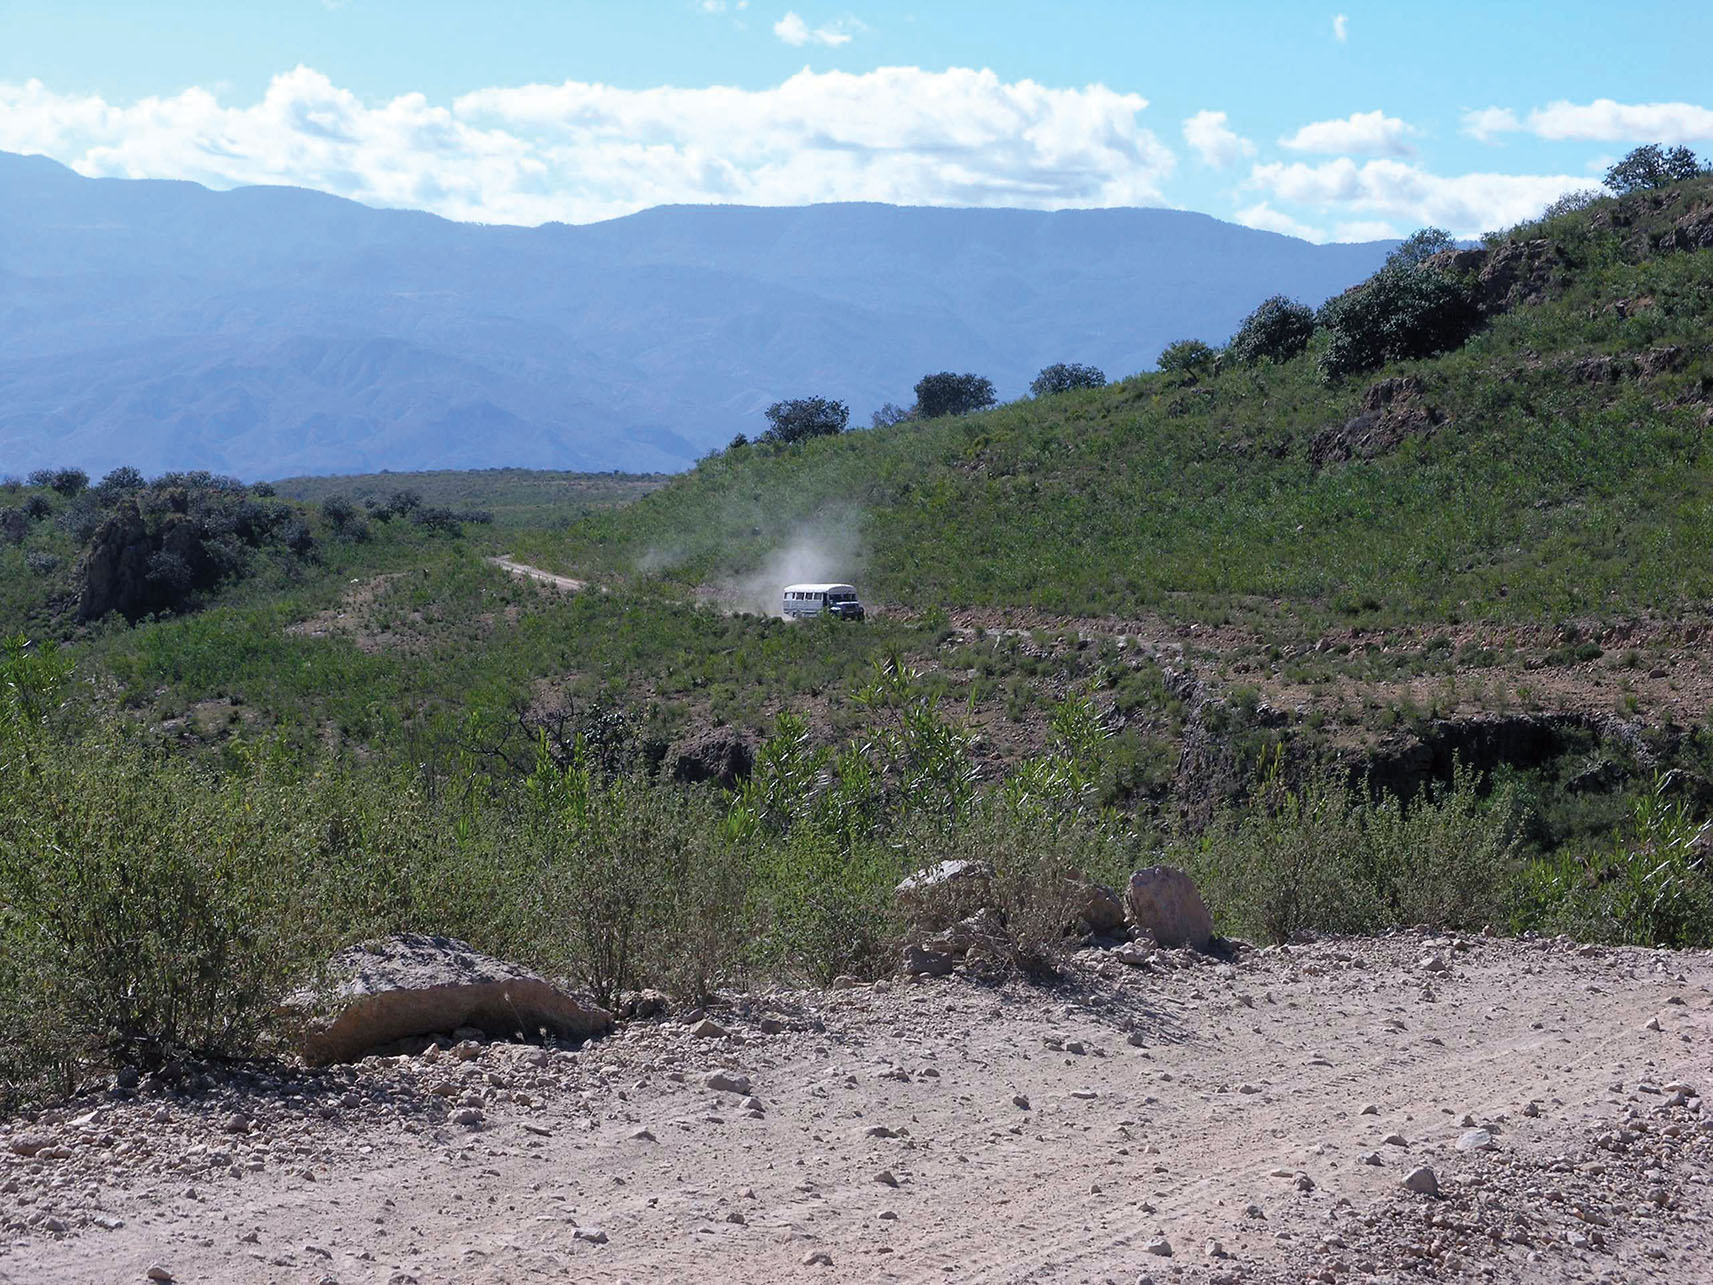 A lone bus kicks up a cloud of dust on a remote dirt road in the Mexican countryside. (Photo by Lon&Queta.)